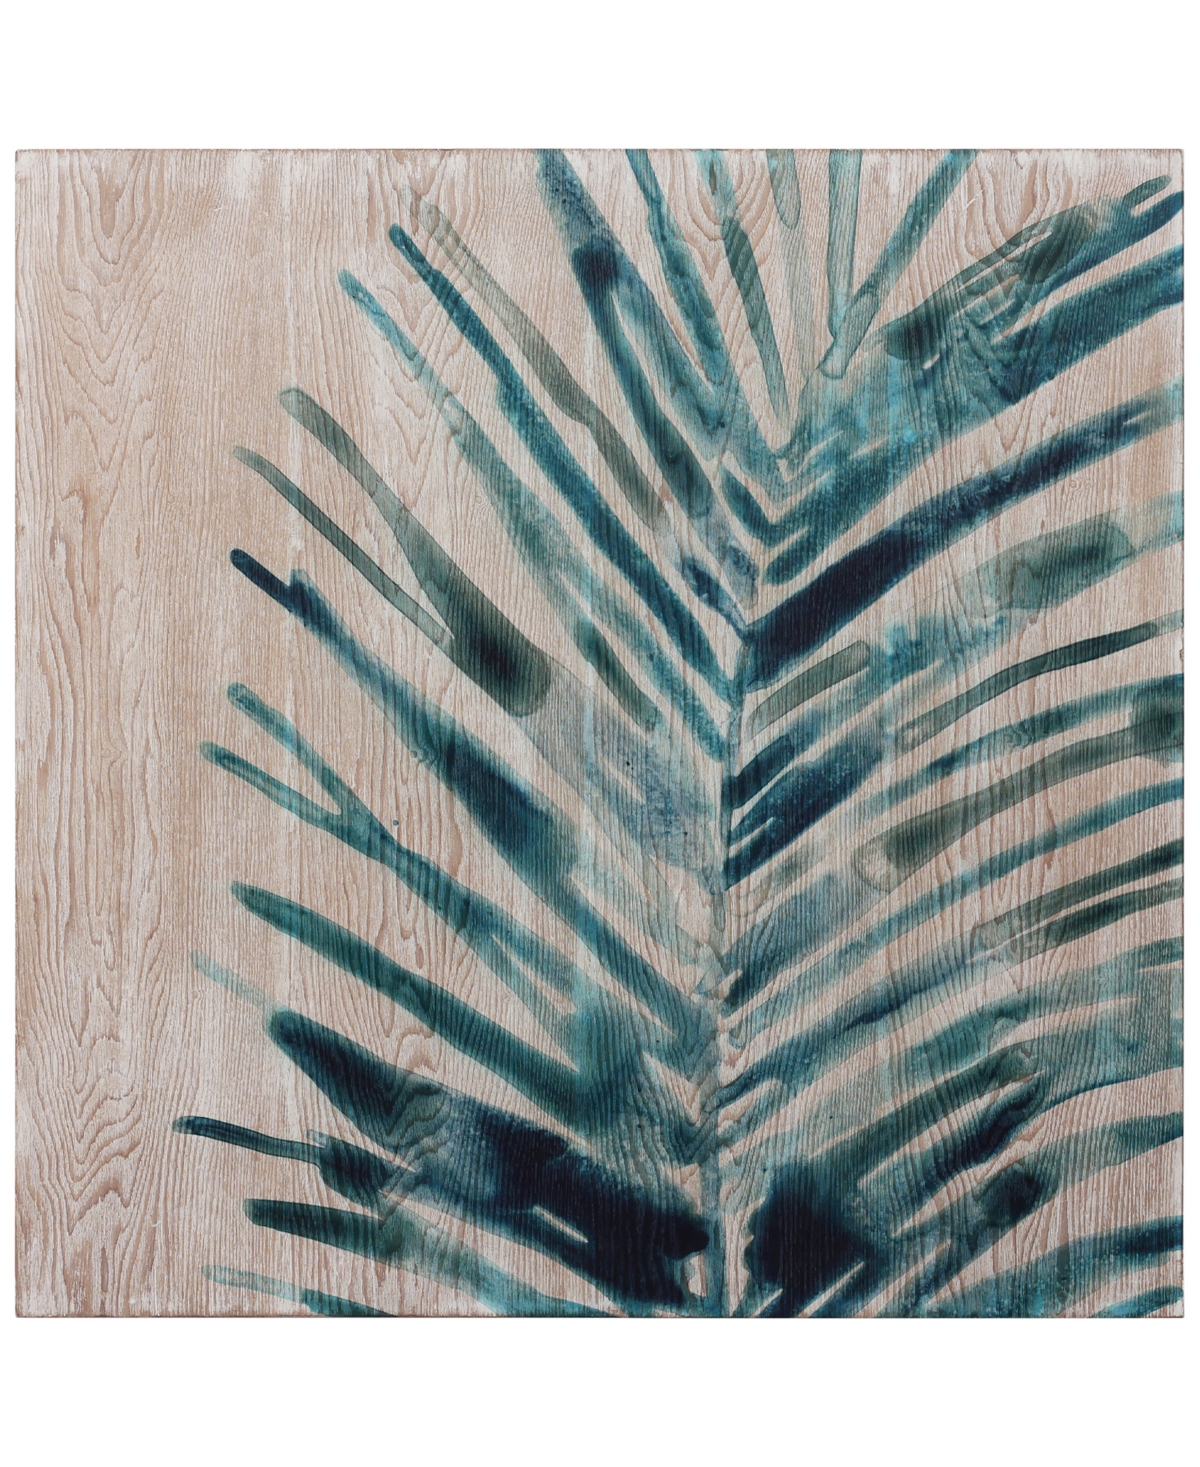 Empire Art Direct "tropical Jewell Iii" Fine Giclee Printed Directly On Hand Finished Ash Wood Wall Art, 24" X 24" X 1 In Blue